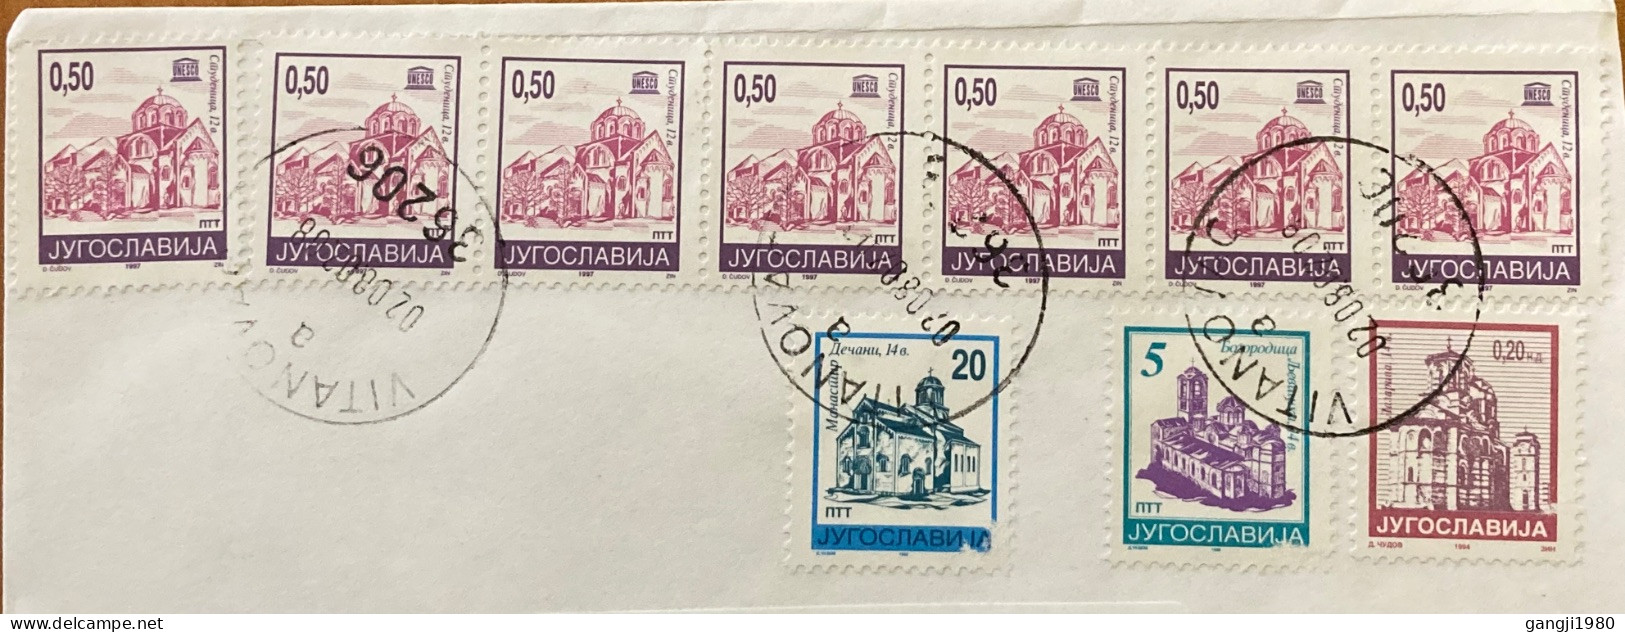 YUGOSLOVAKIA 1997 COVER USED TO USA, ARCHITECTURE BUILDING HERITAGE, CHURCH MULTI 10 STAMPS,VITANOVAC TOWN CANCEL. - Lettres & Documents